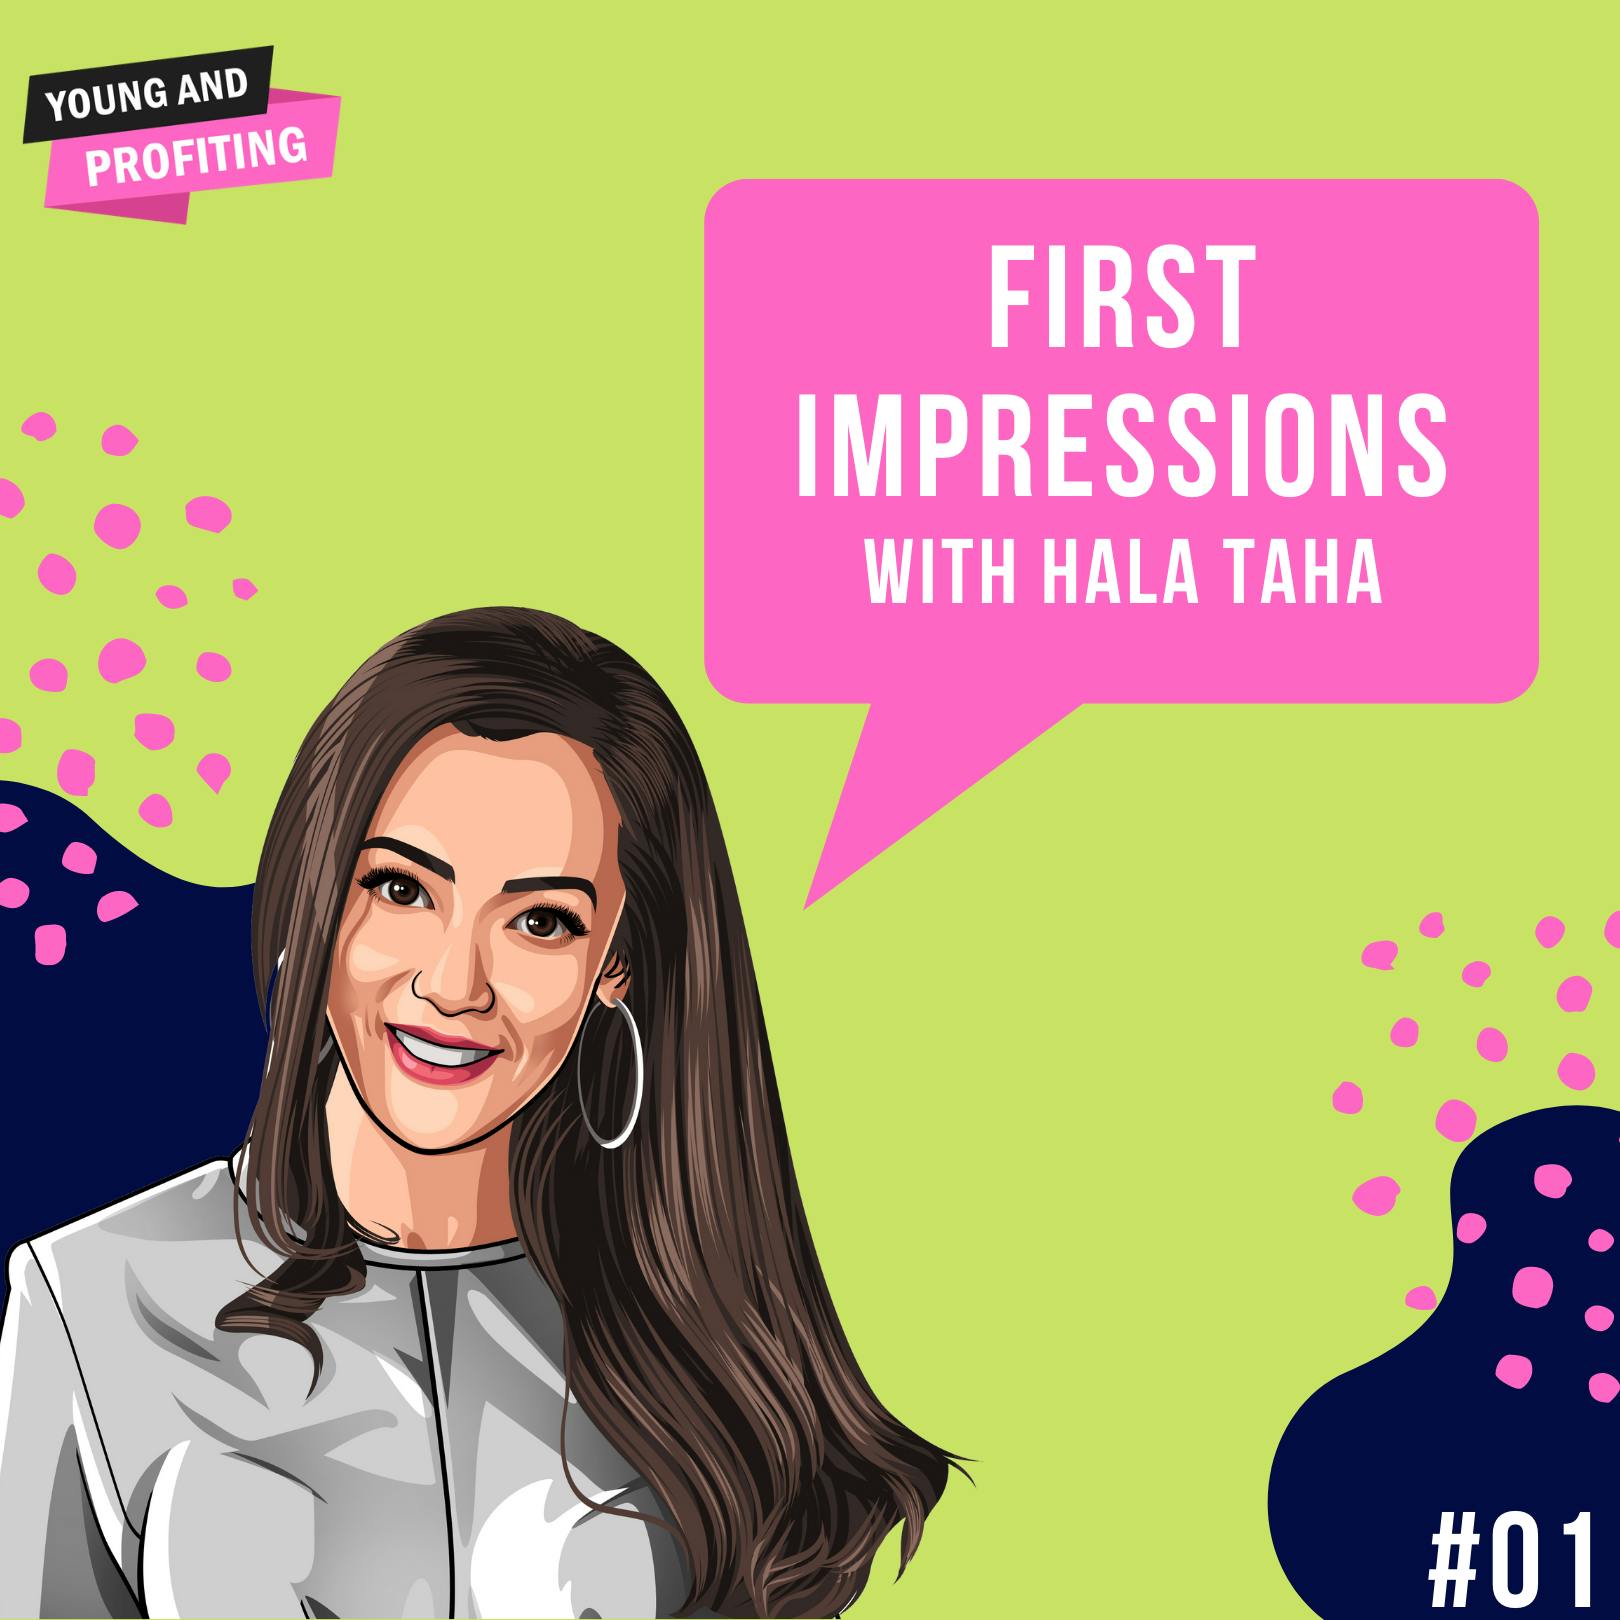 Hala Taha: First Impressions & Nail Your First Impressions | E1 by Hala Taha | YAP Media Network